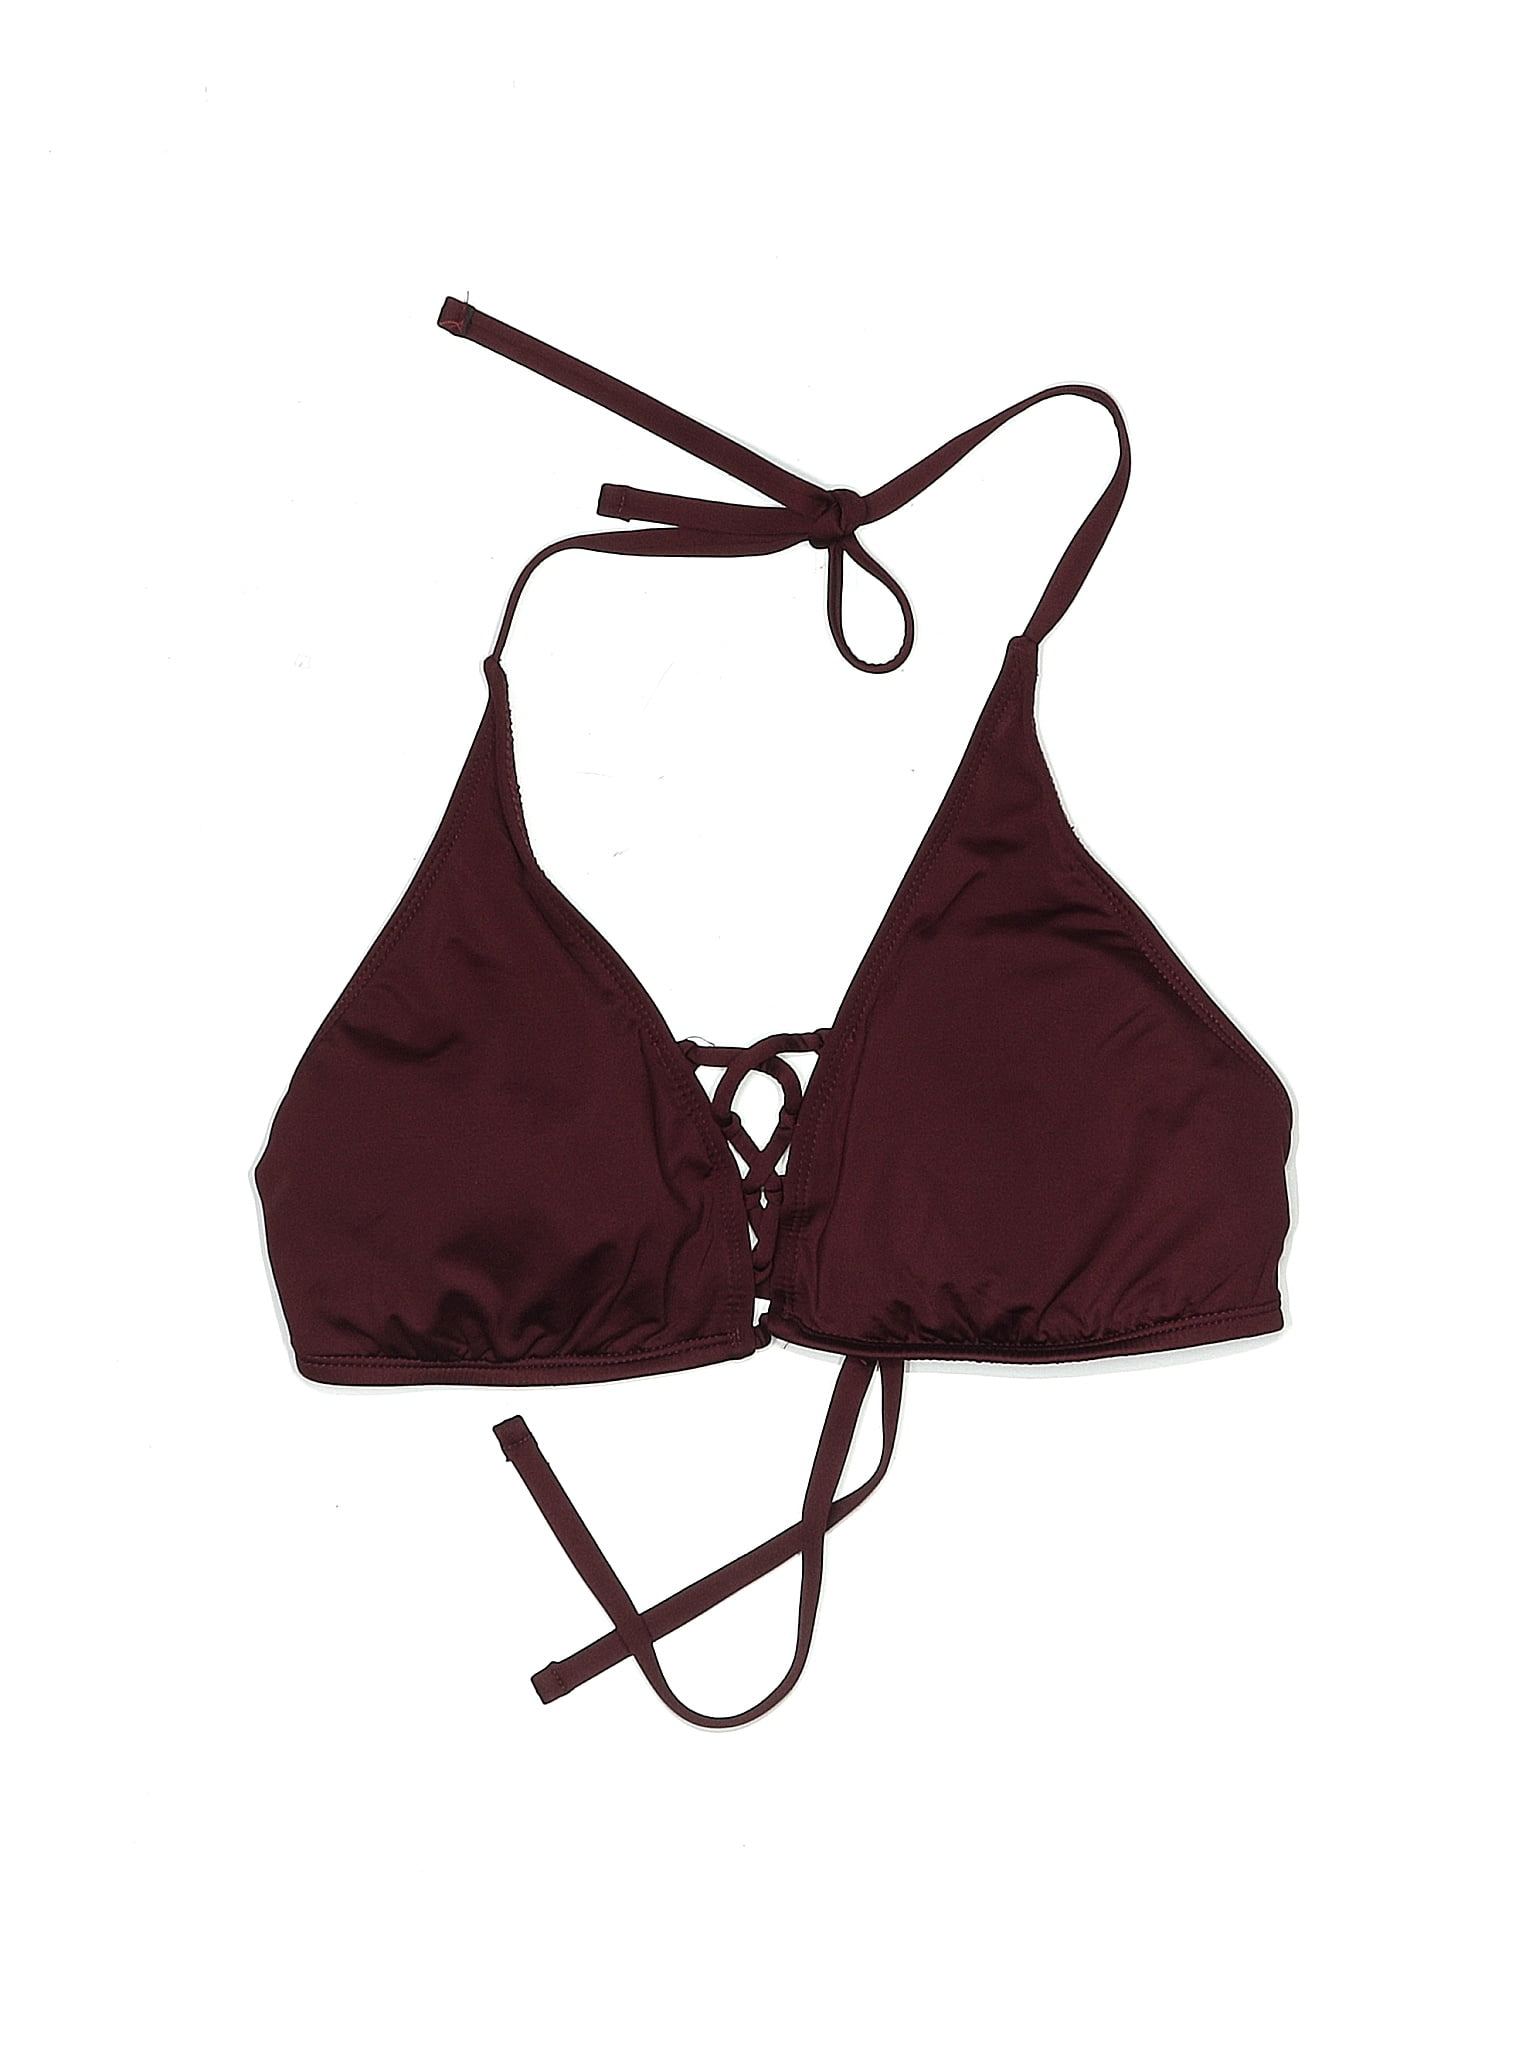 Mossimo Solid Maroon Burgundy Swimsuit Top Size Med - Lg - 38% off